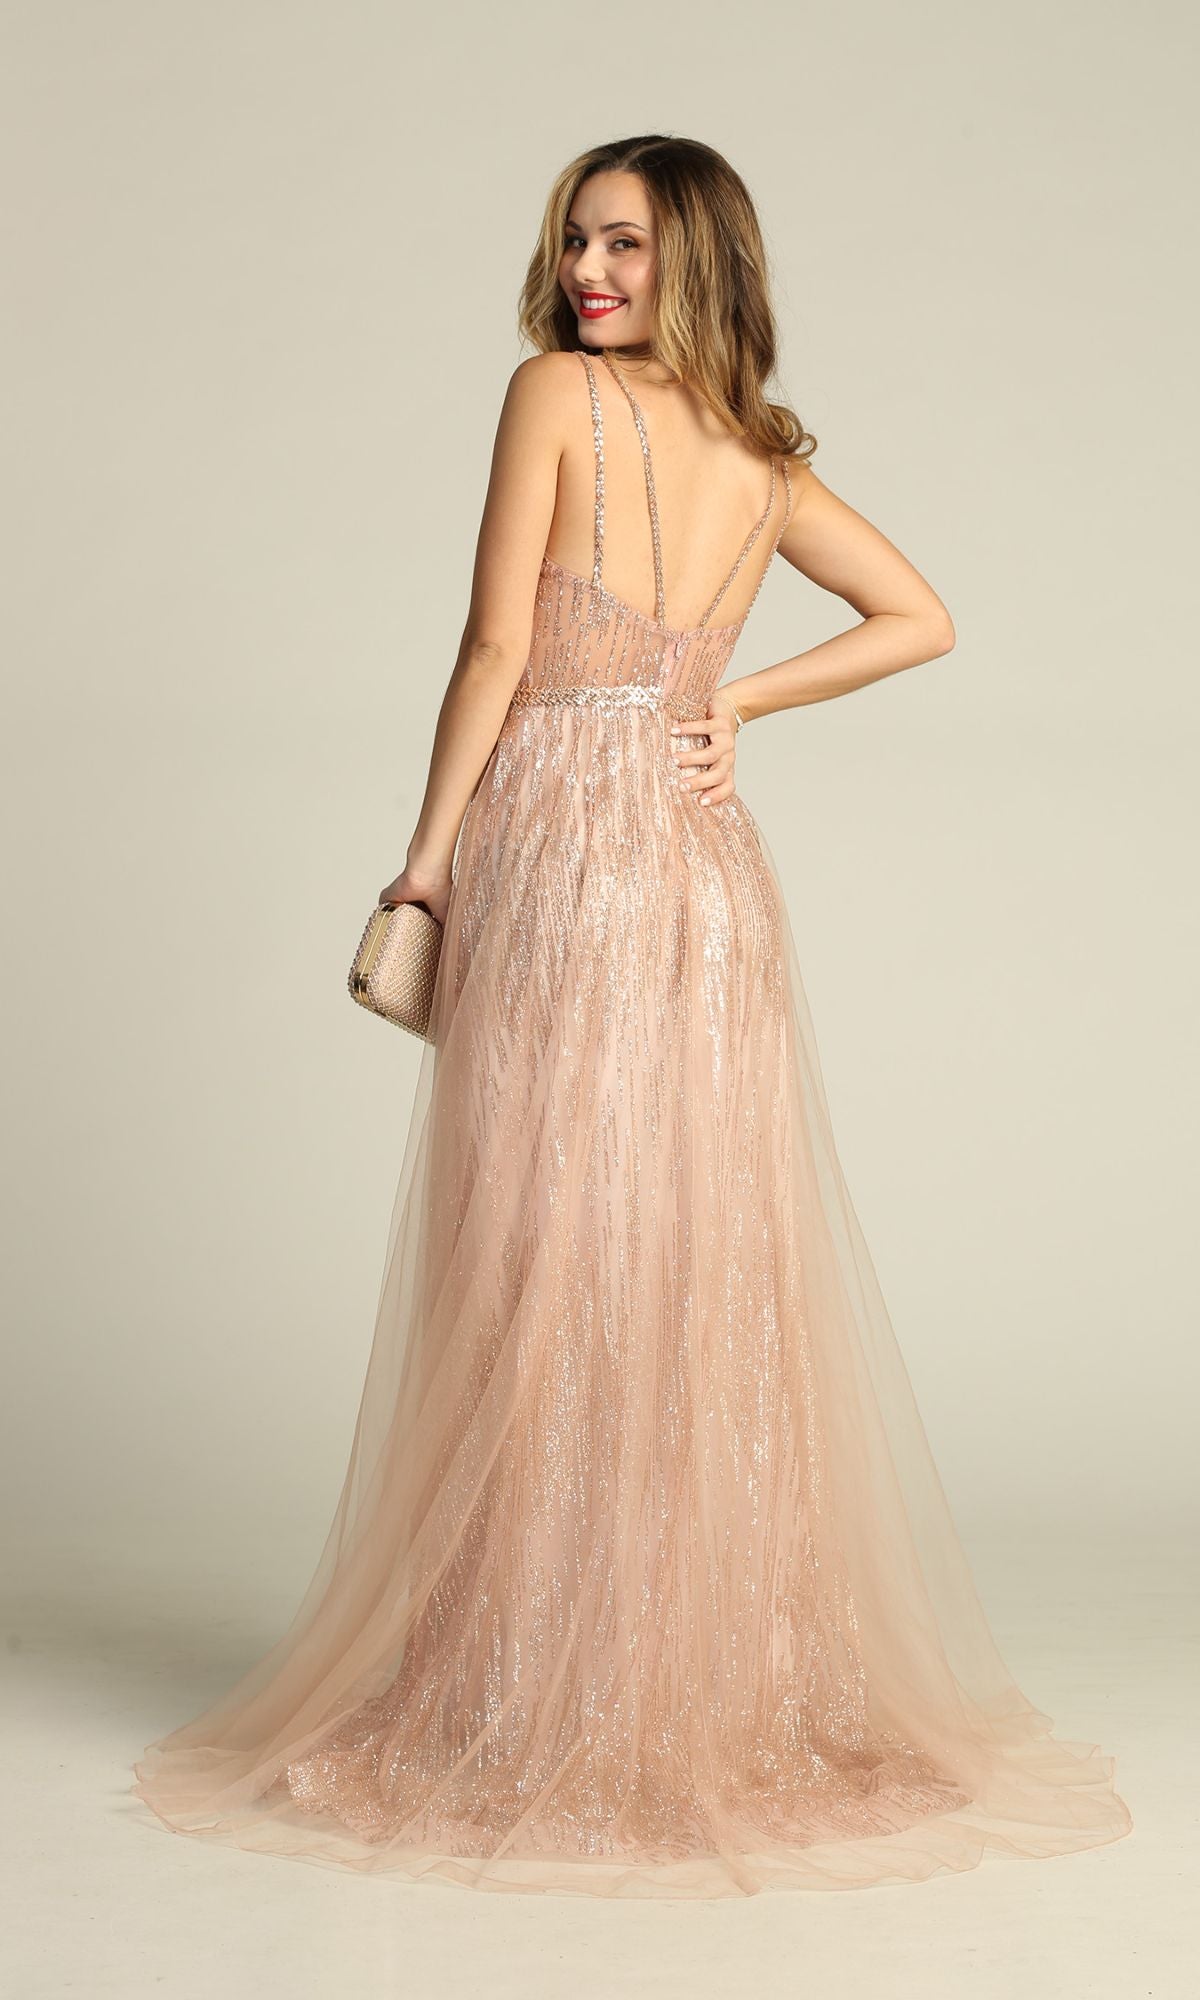 Long Prom Dress YG5021 by Chicas